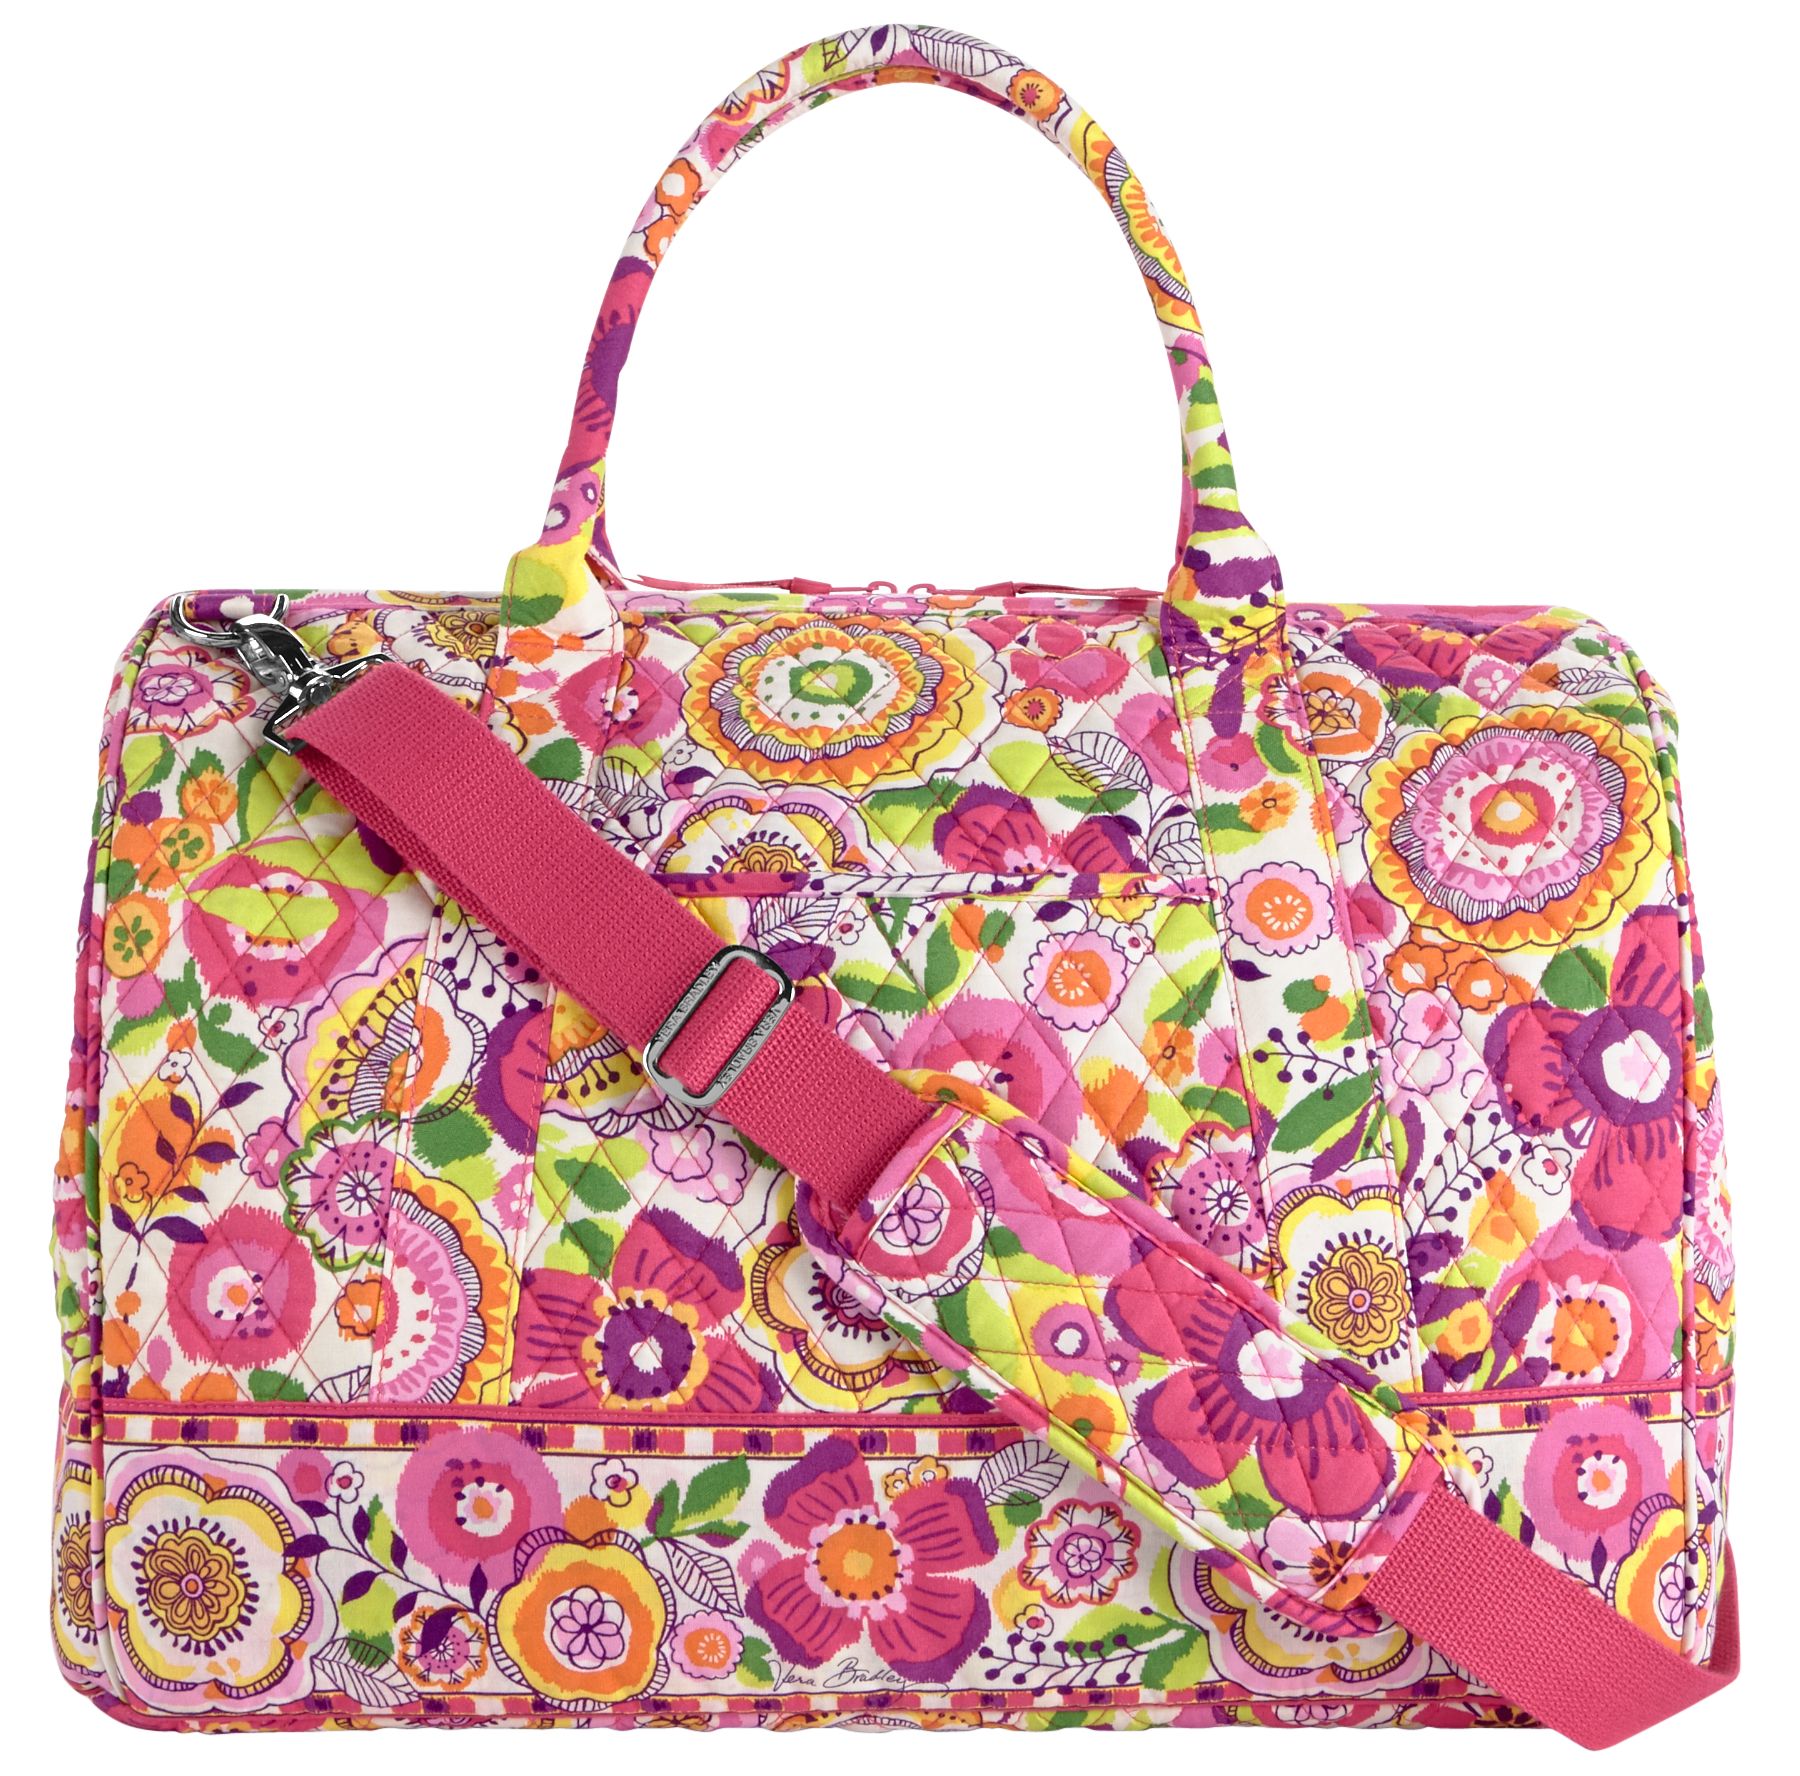 Vera Bradley Extra 20% off Sale Items, This Weekend Only